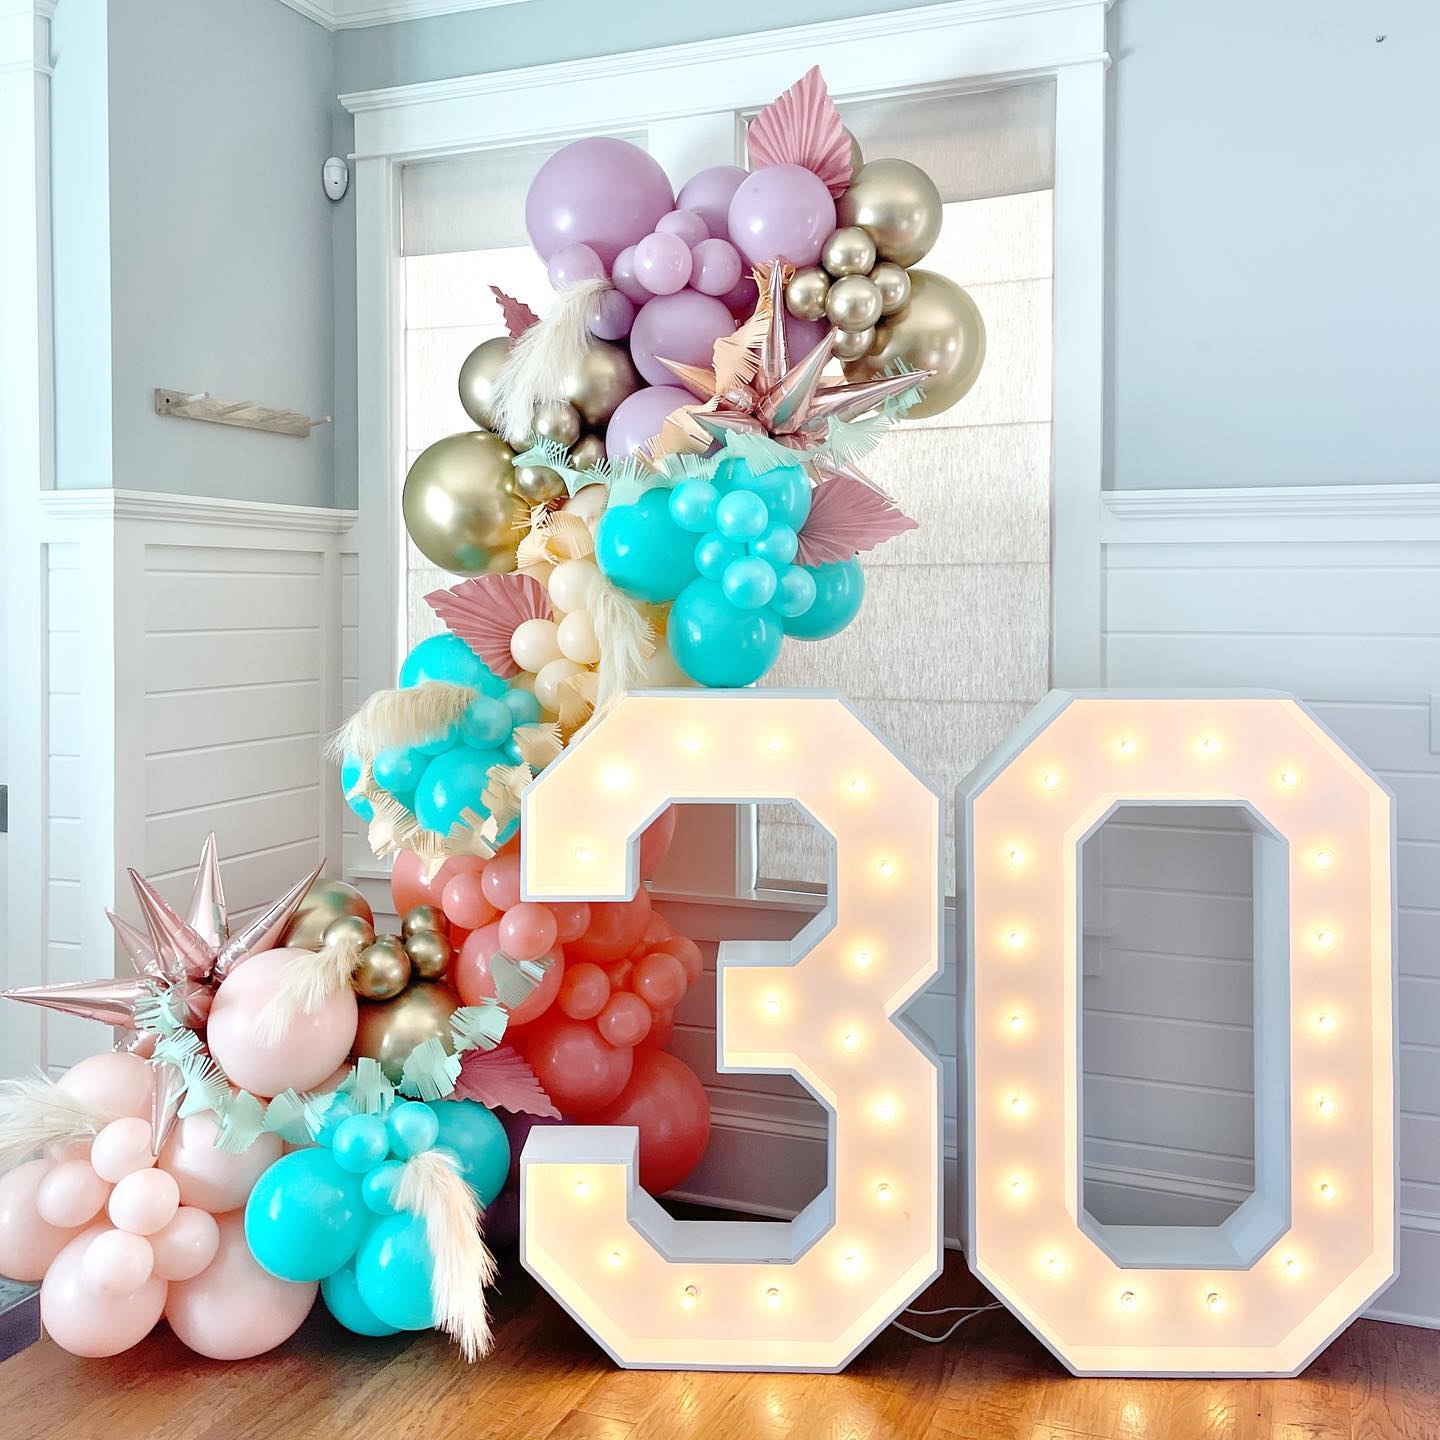 This is a reminder to book our light up marquee numbers for your 2023 birthday celebrations! 💡😉 link in profile

#marqueelights #marqueenumbers #eventplanner #partyideas #balloonstylist #balloonsofinstagram